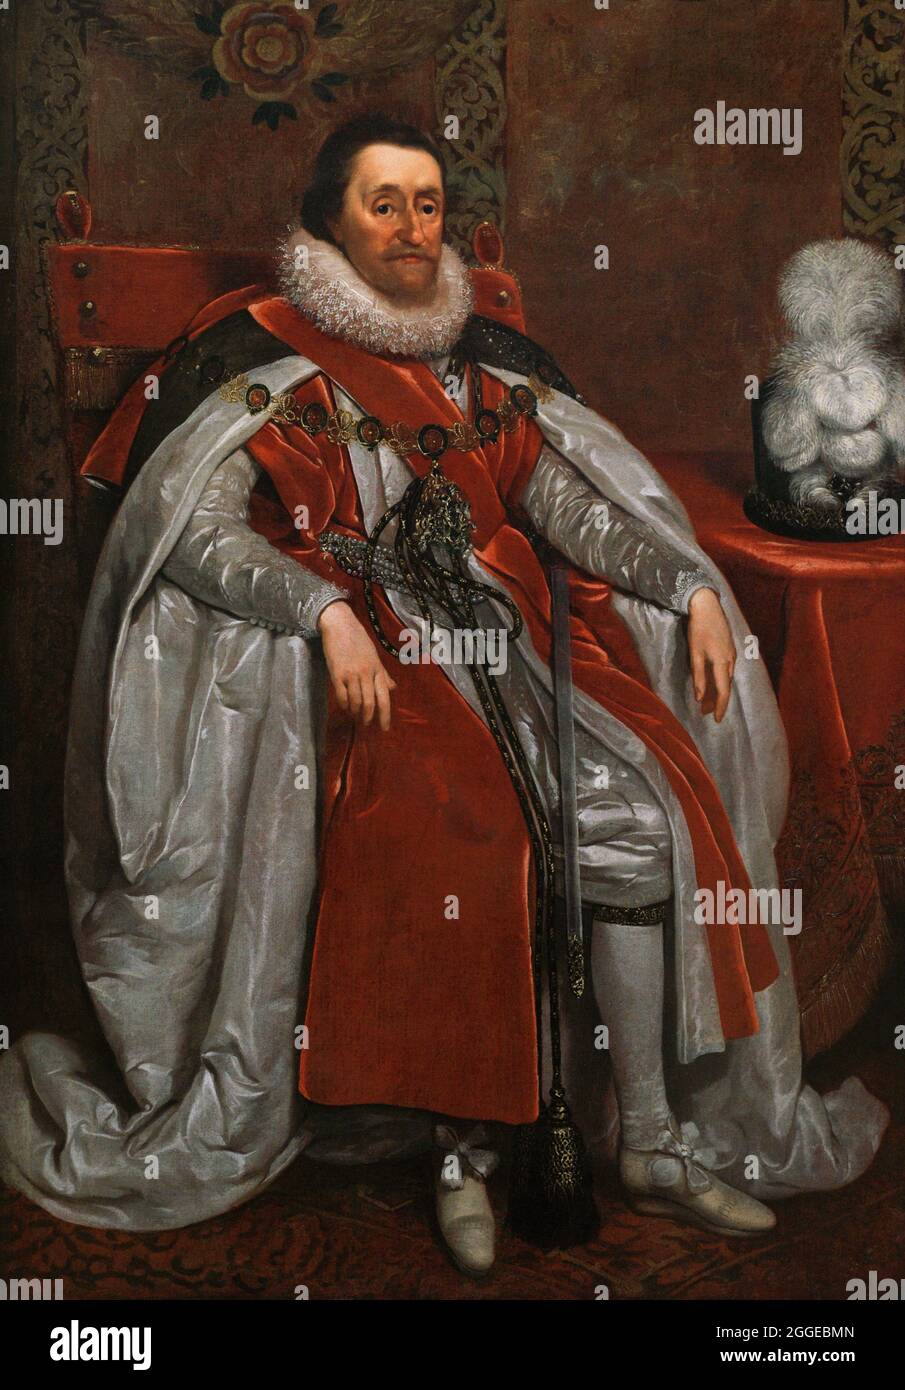 King James I of England and VI of Scotland (1566-1625). Portrait by Daniel Mytens (1590-1647/48). Oil on canvas (148,6 x 100,6 cm), 1621. National Portrait Gallery. London, England, United Kingdom. Stock Photo